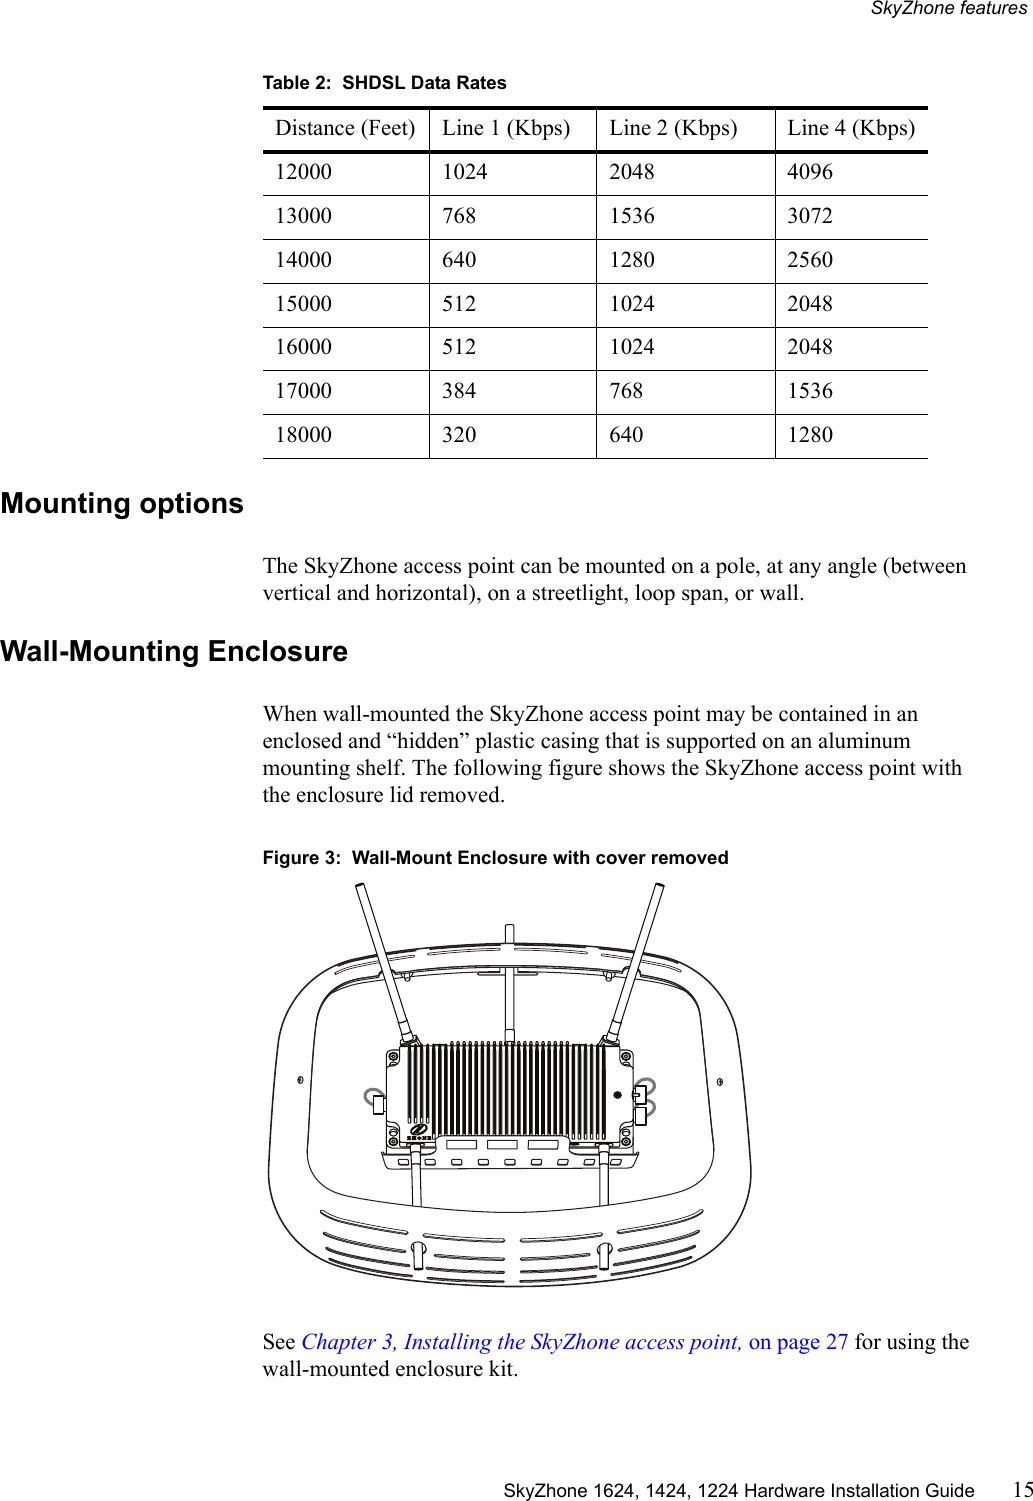 SkyZhone features SkyZhone 1624, 1424, 1224 Hardware Installation Guide 15Mounting optionsThe SkyZhone access point can be mounted on a pole, at any angle (between vertical and horizontal), on a streetlight, loop span, or wall. Wall-Mounting EnclosureWhen wall-mounted the SkyZhone access point may be contained in an enclosed and “hidden” plastic casing that is supported on an aluminum mounting shelf. The following figure shows the SkyZhone access point with the enclosure lid removed.Figure 3:  Wall-Mount Enclosure with cover removedSee Chapter 3, Installing the SkyZhone access point, on page 27 for using the wall-mounted enclosure kit.12000 1024 2048 409613000 768 1536 307214000 640 1280 256015000 512 1024 204816000 512 1024 2048 17000 384 768 153618000 320 640 1280Table 2:  SHDSL Data RatesDistance (Feet) Line 1 (Kbps) Line 2 (Kbps) Line 4 (Kbps)